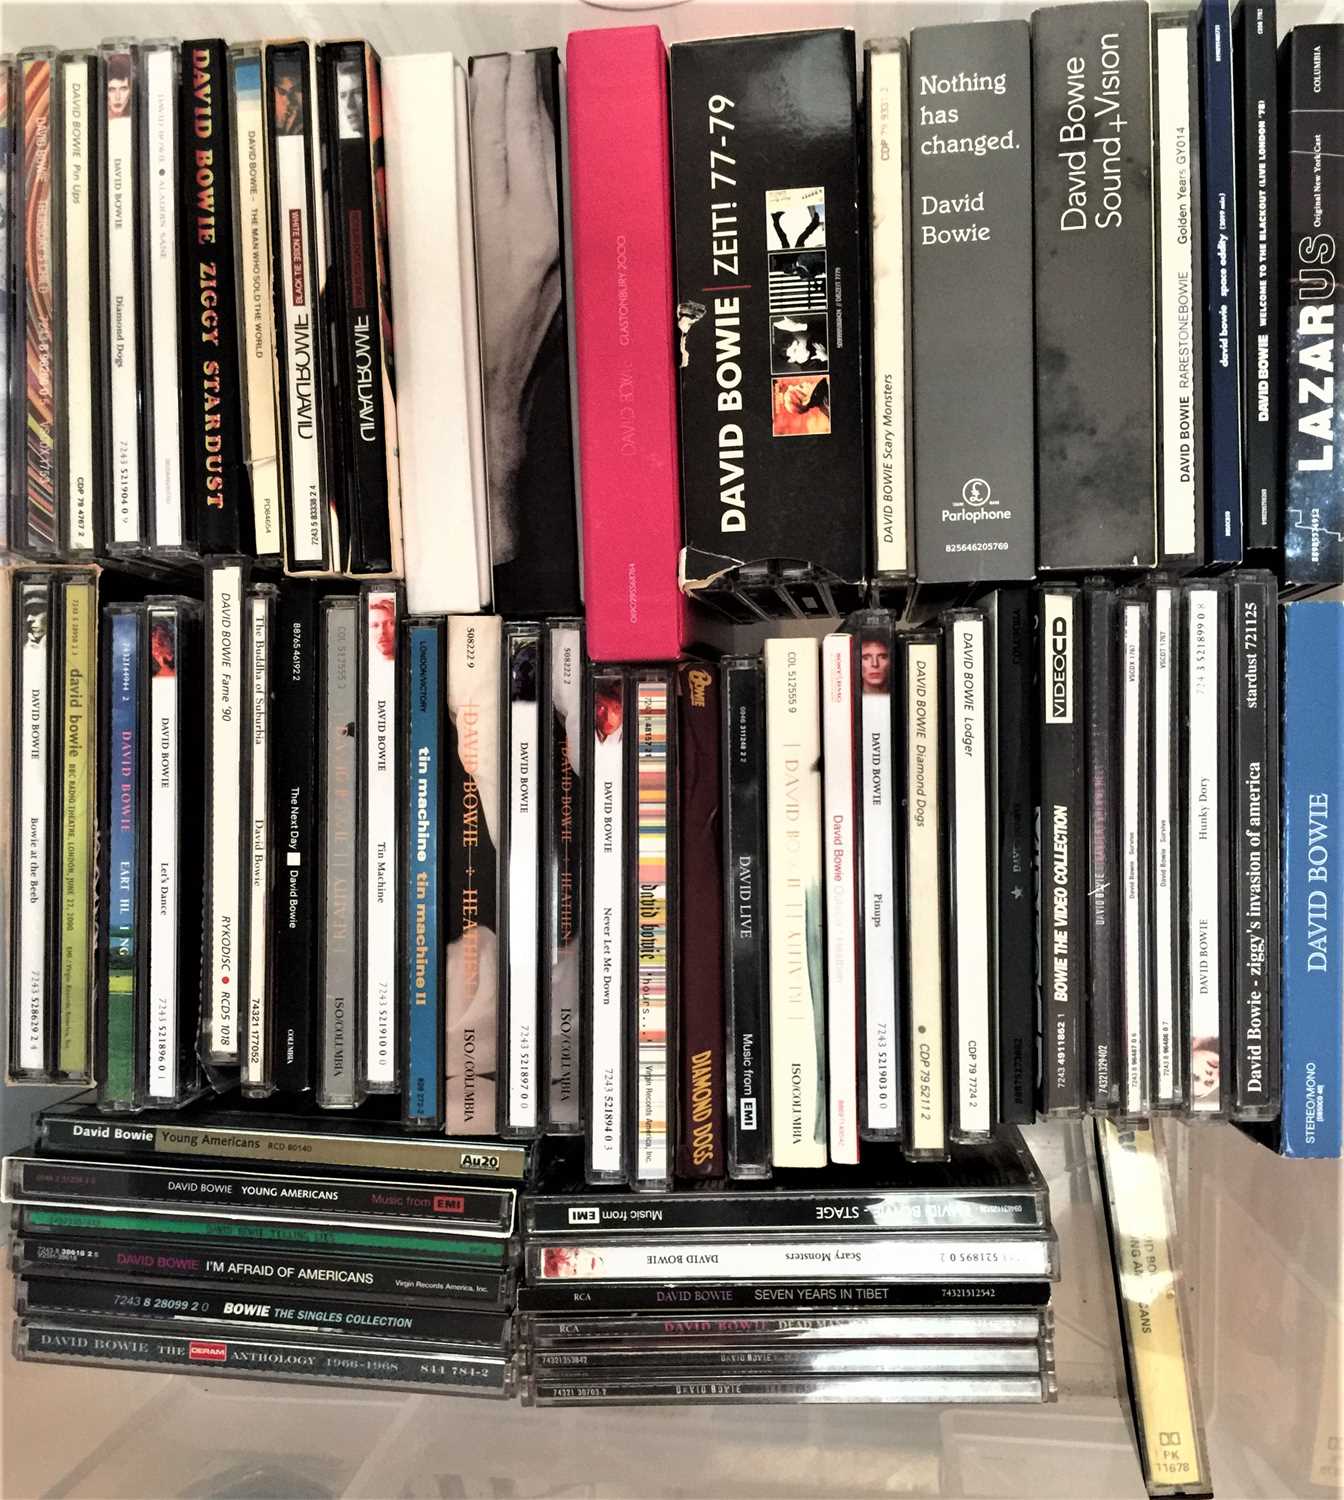 DAVID BOWIE - CD COLLECTION PLUS LP/12" SELECTION - Image 4 of 5